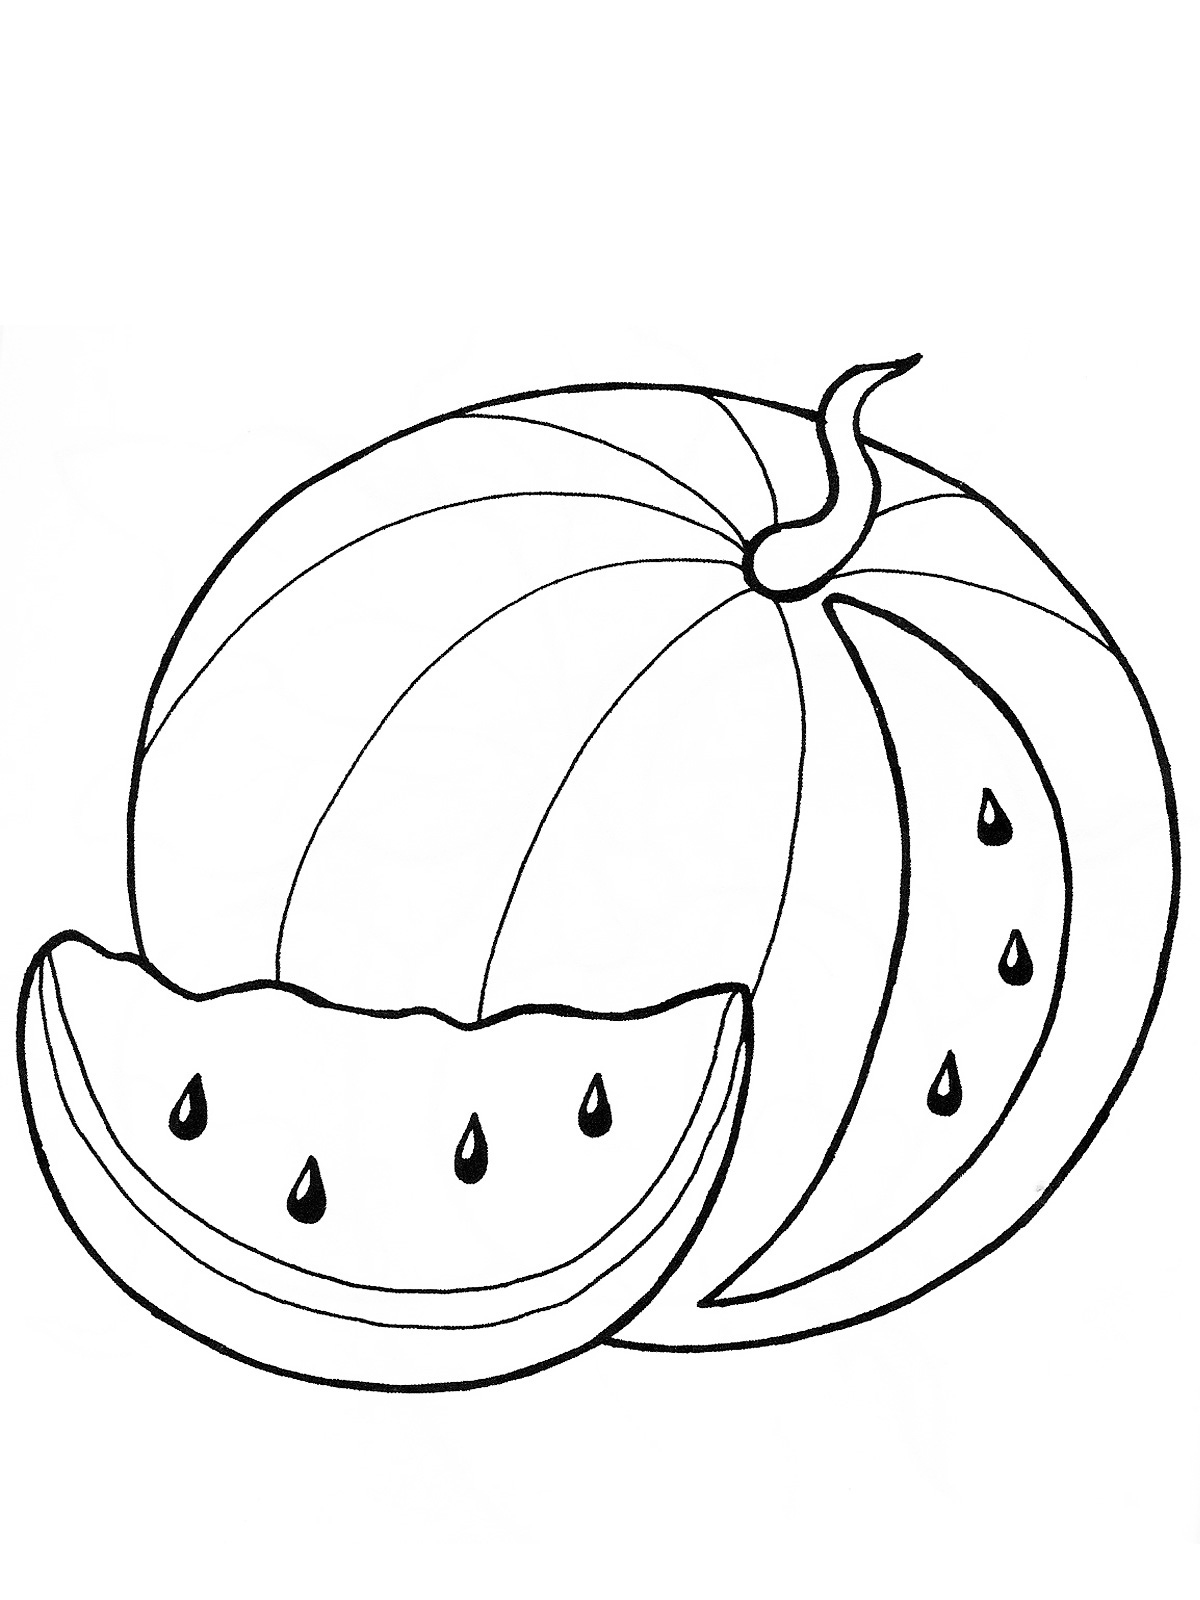 watermelon-coloring-pages-to-download-and-print-for-free